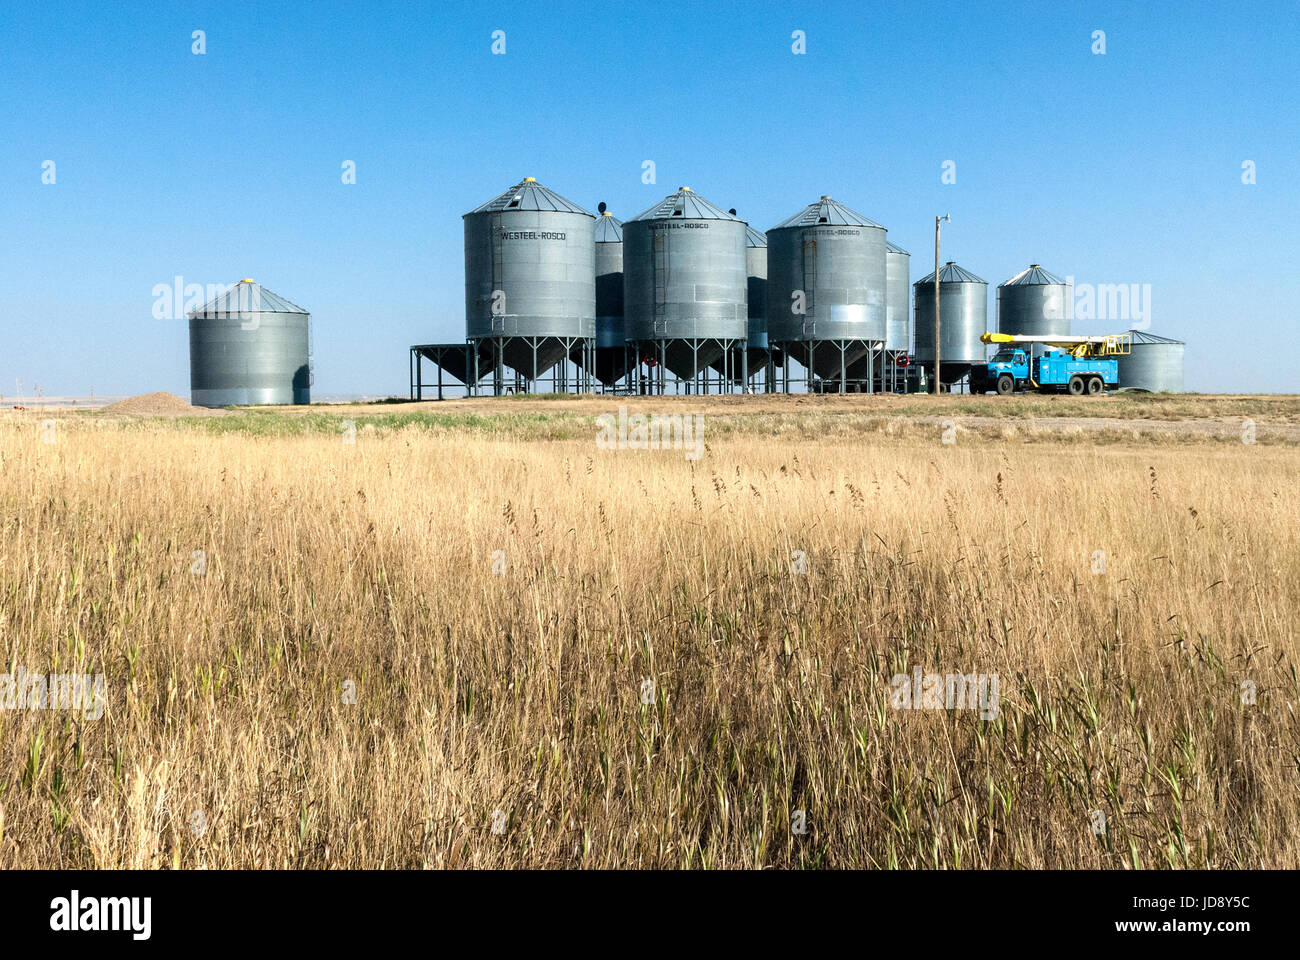 Silo group in praire filed Stock Photo